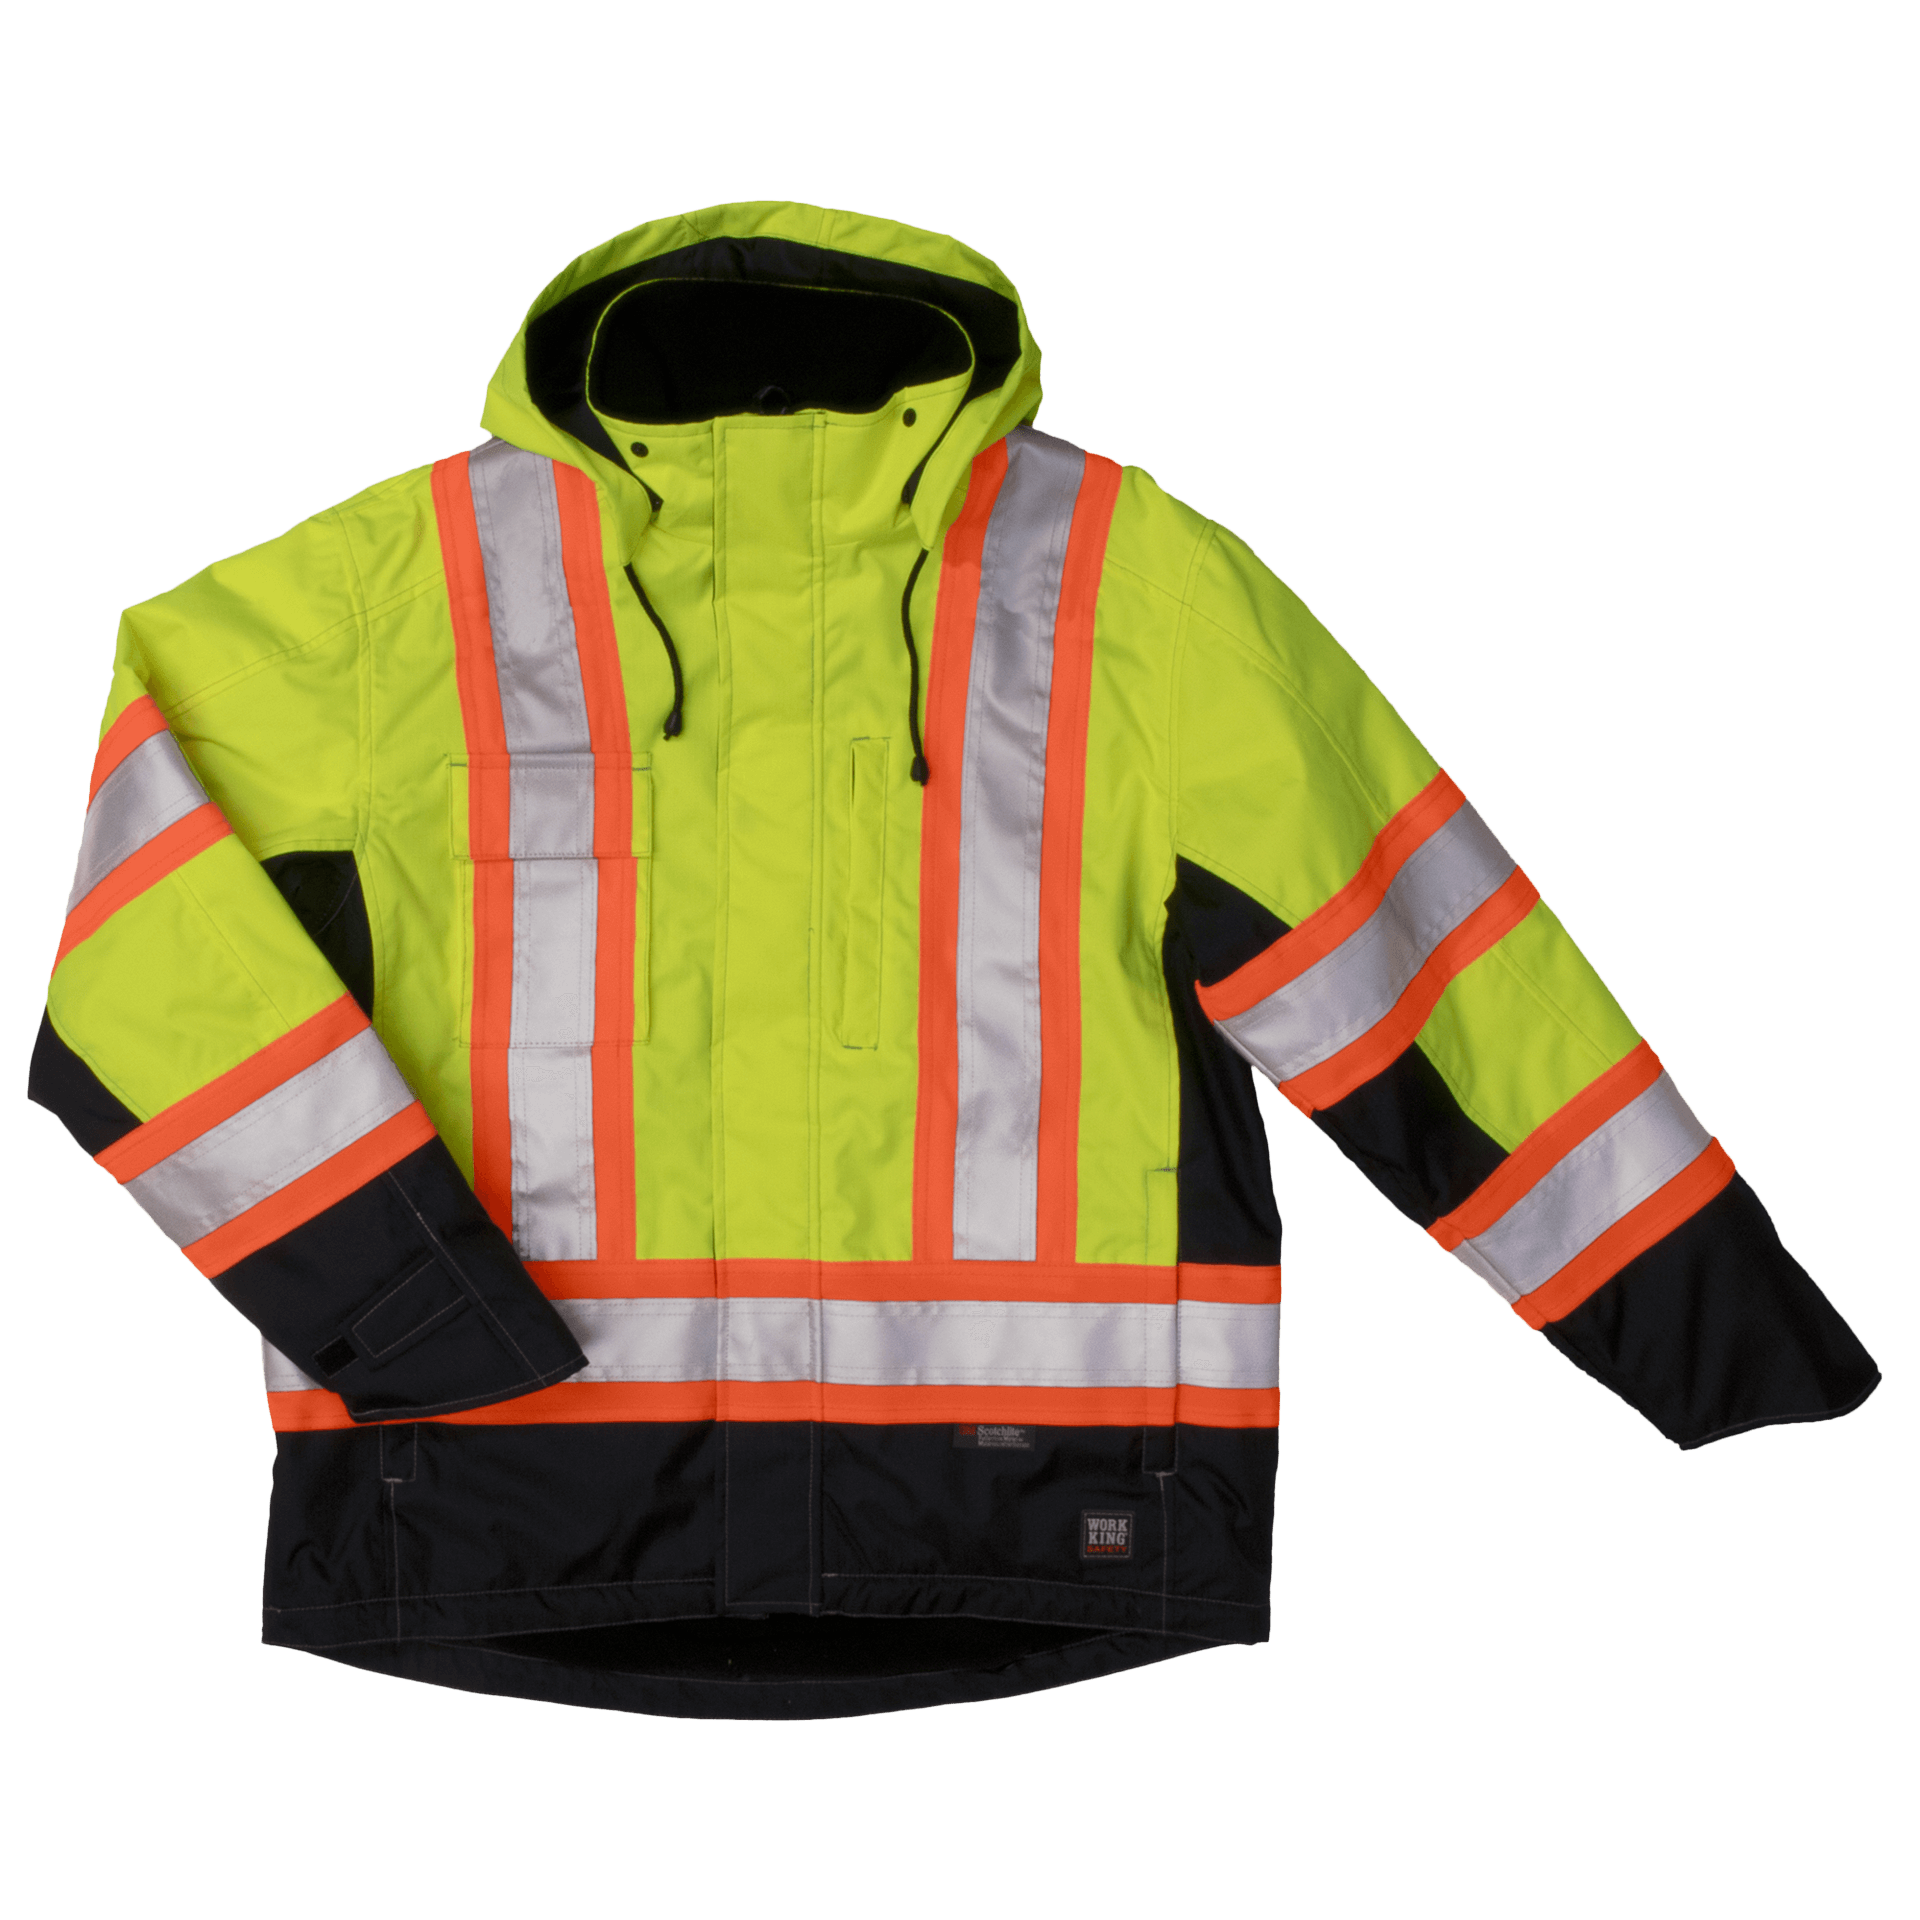 TOUGH DUCK 5-IN-1 SAFETY JACKET - Mucksters Supply Corp